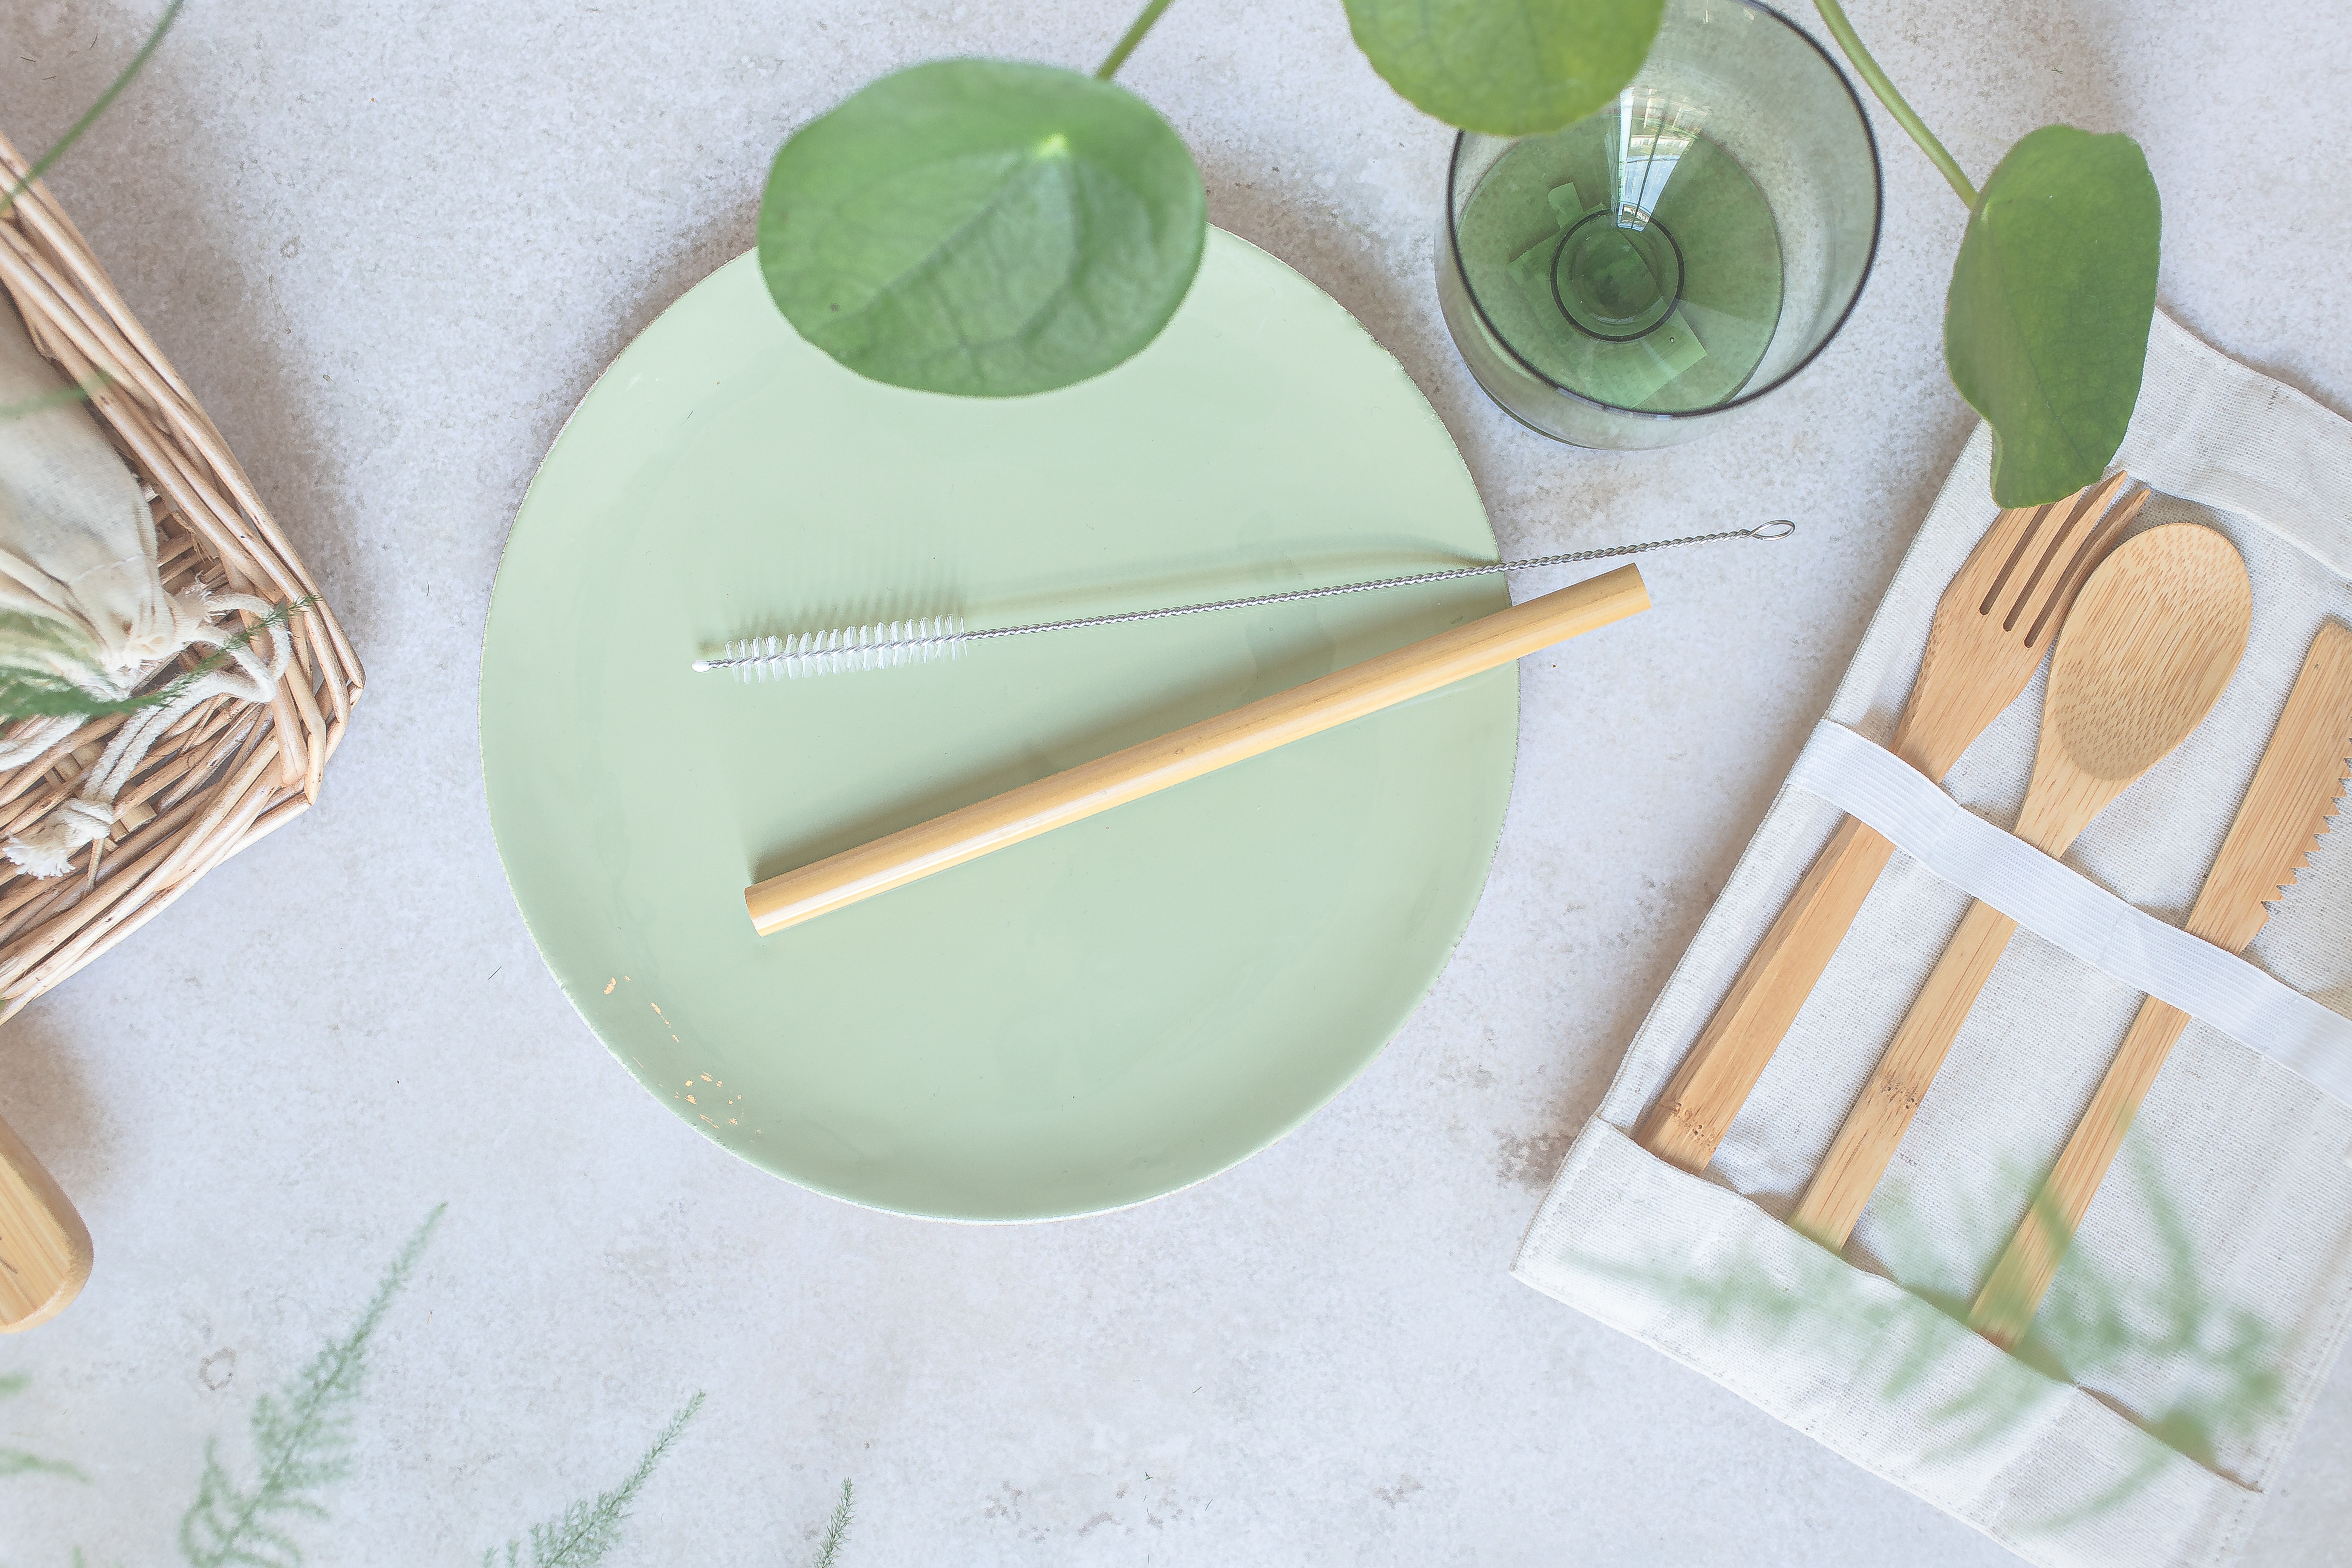 bamboo eating utensiles, straw, straw cleaner, and light green ceremic plate, drinking glass